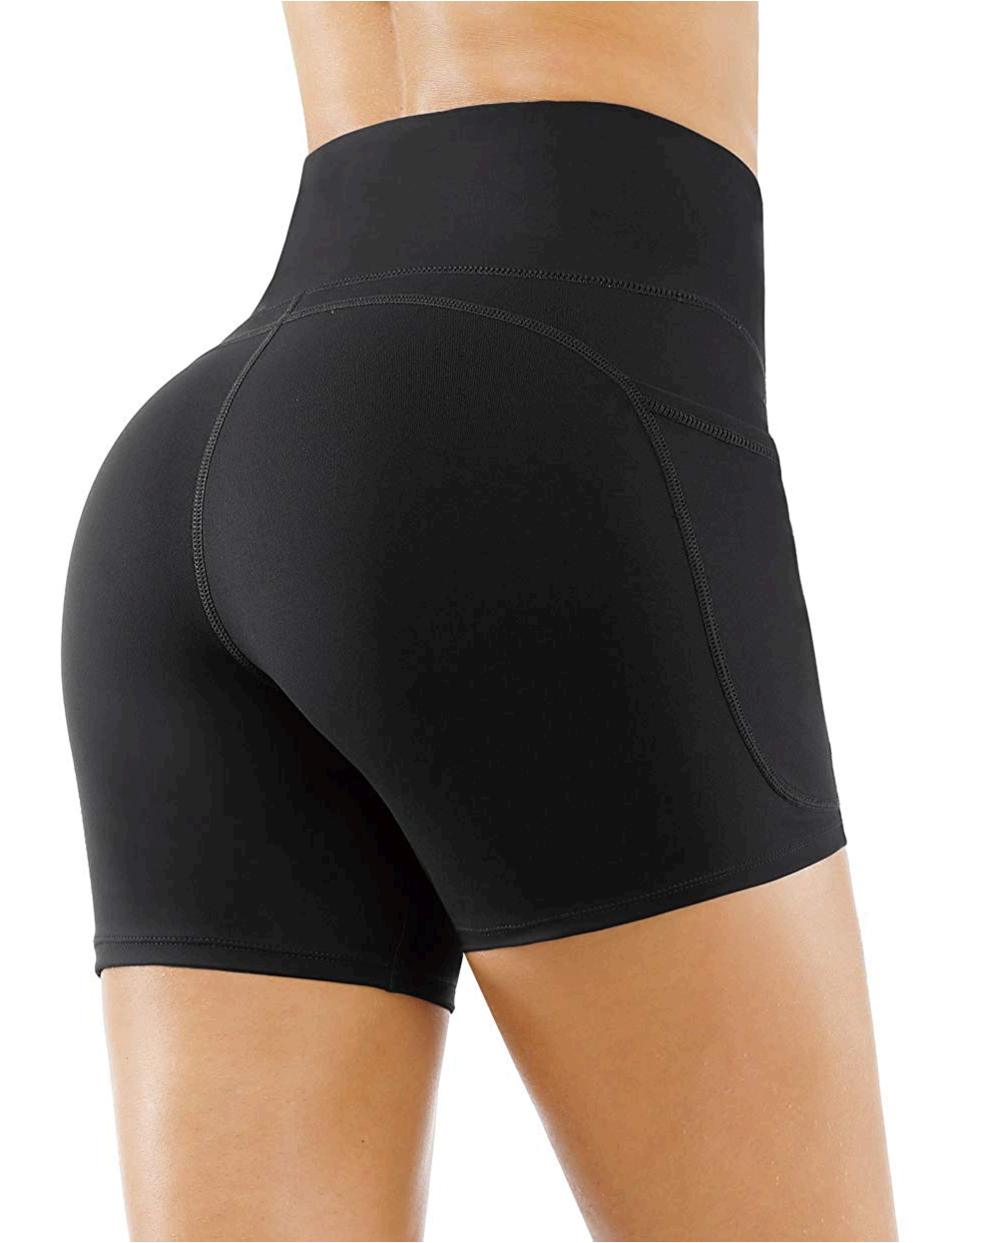 THE GYM PEOPLE High Waist Yoga Shorts for Women Tummy, Black, Size ...